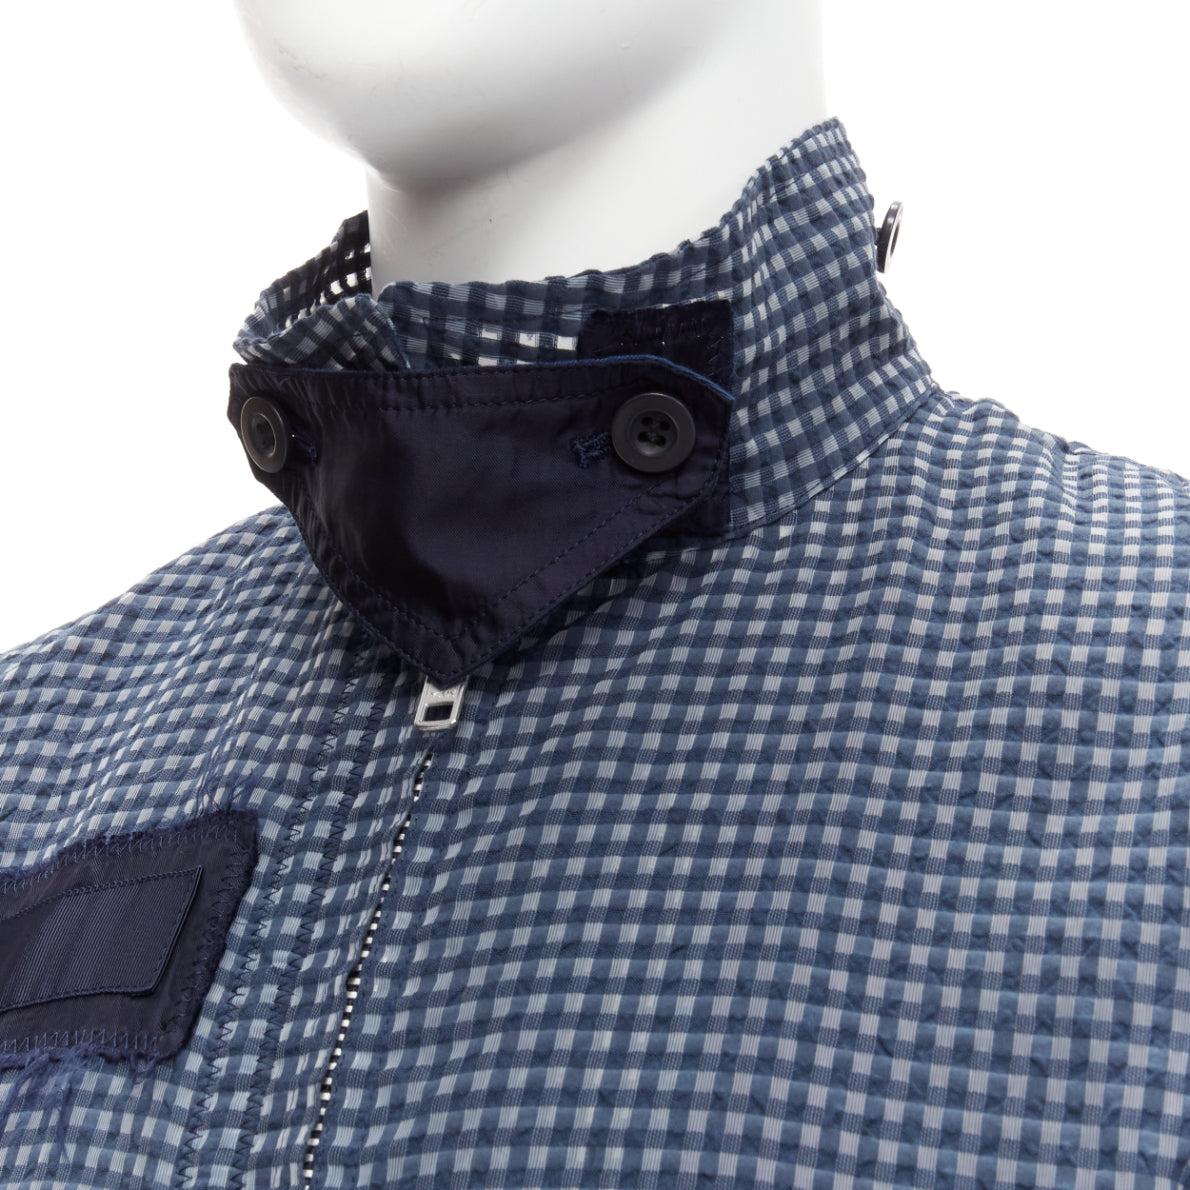 SACAI 2015 navy grey gingham cotton blend high neck bomber jacket JP3 L
Reference: CAWG/A00263
Brand: Sacai
Designer: Chitose Abe
Collection: 2015
Material: Cotton, Blend
Color: Navy, Grey
Pattern: Gingham
Closure: Zip
Lining: Navy Fabric
Extra